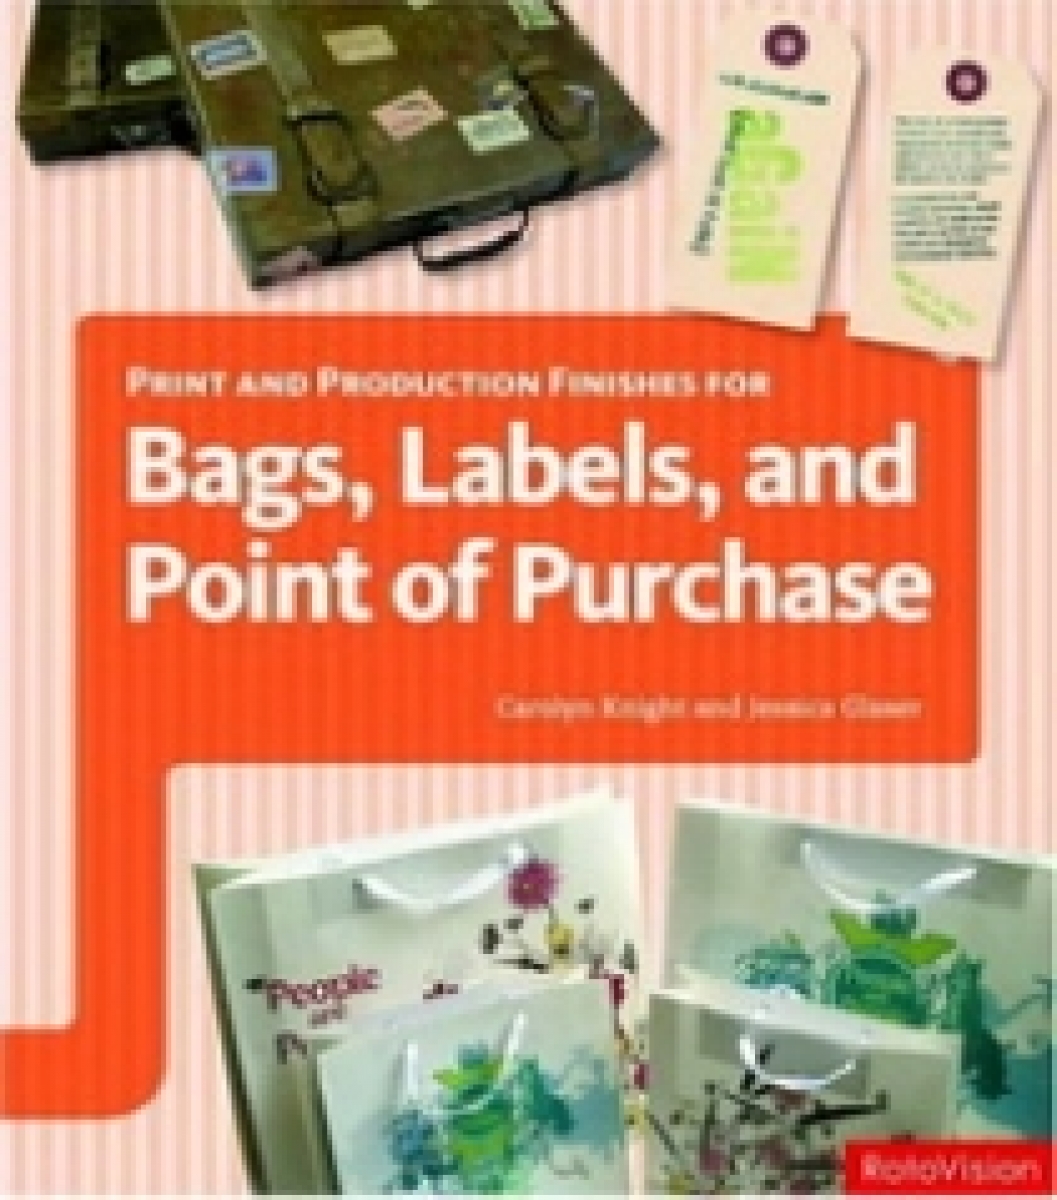 Jessica G. Print and Production Finishes for Bags, Labels, and Point of Purchase 